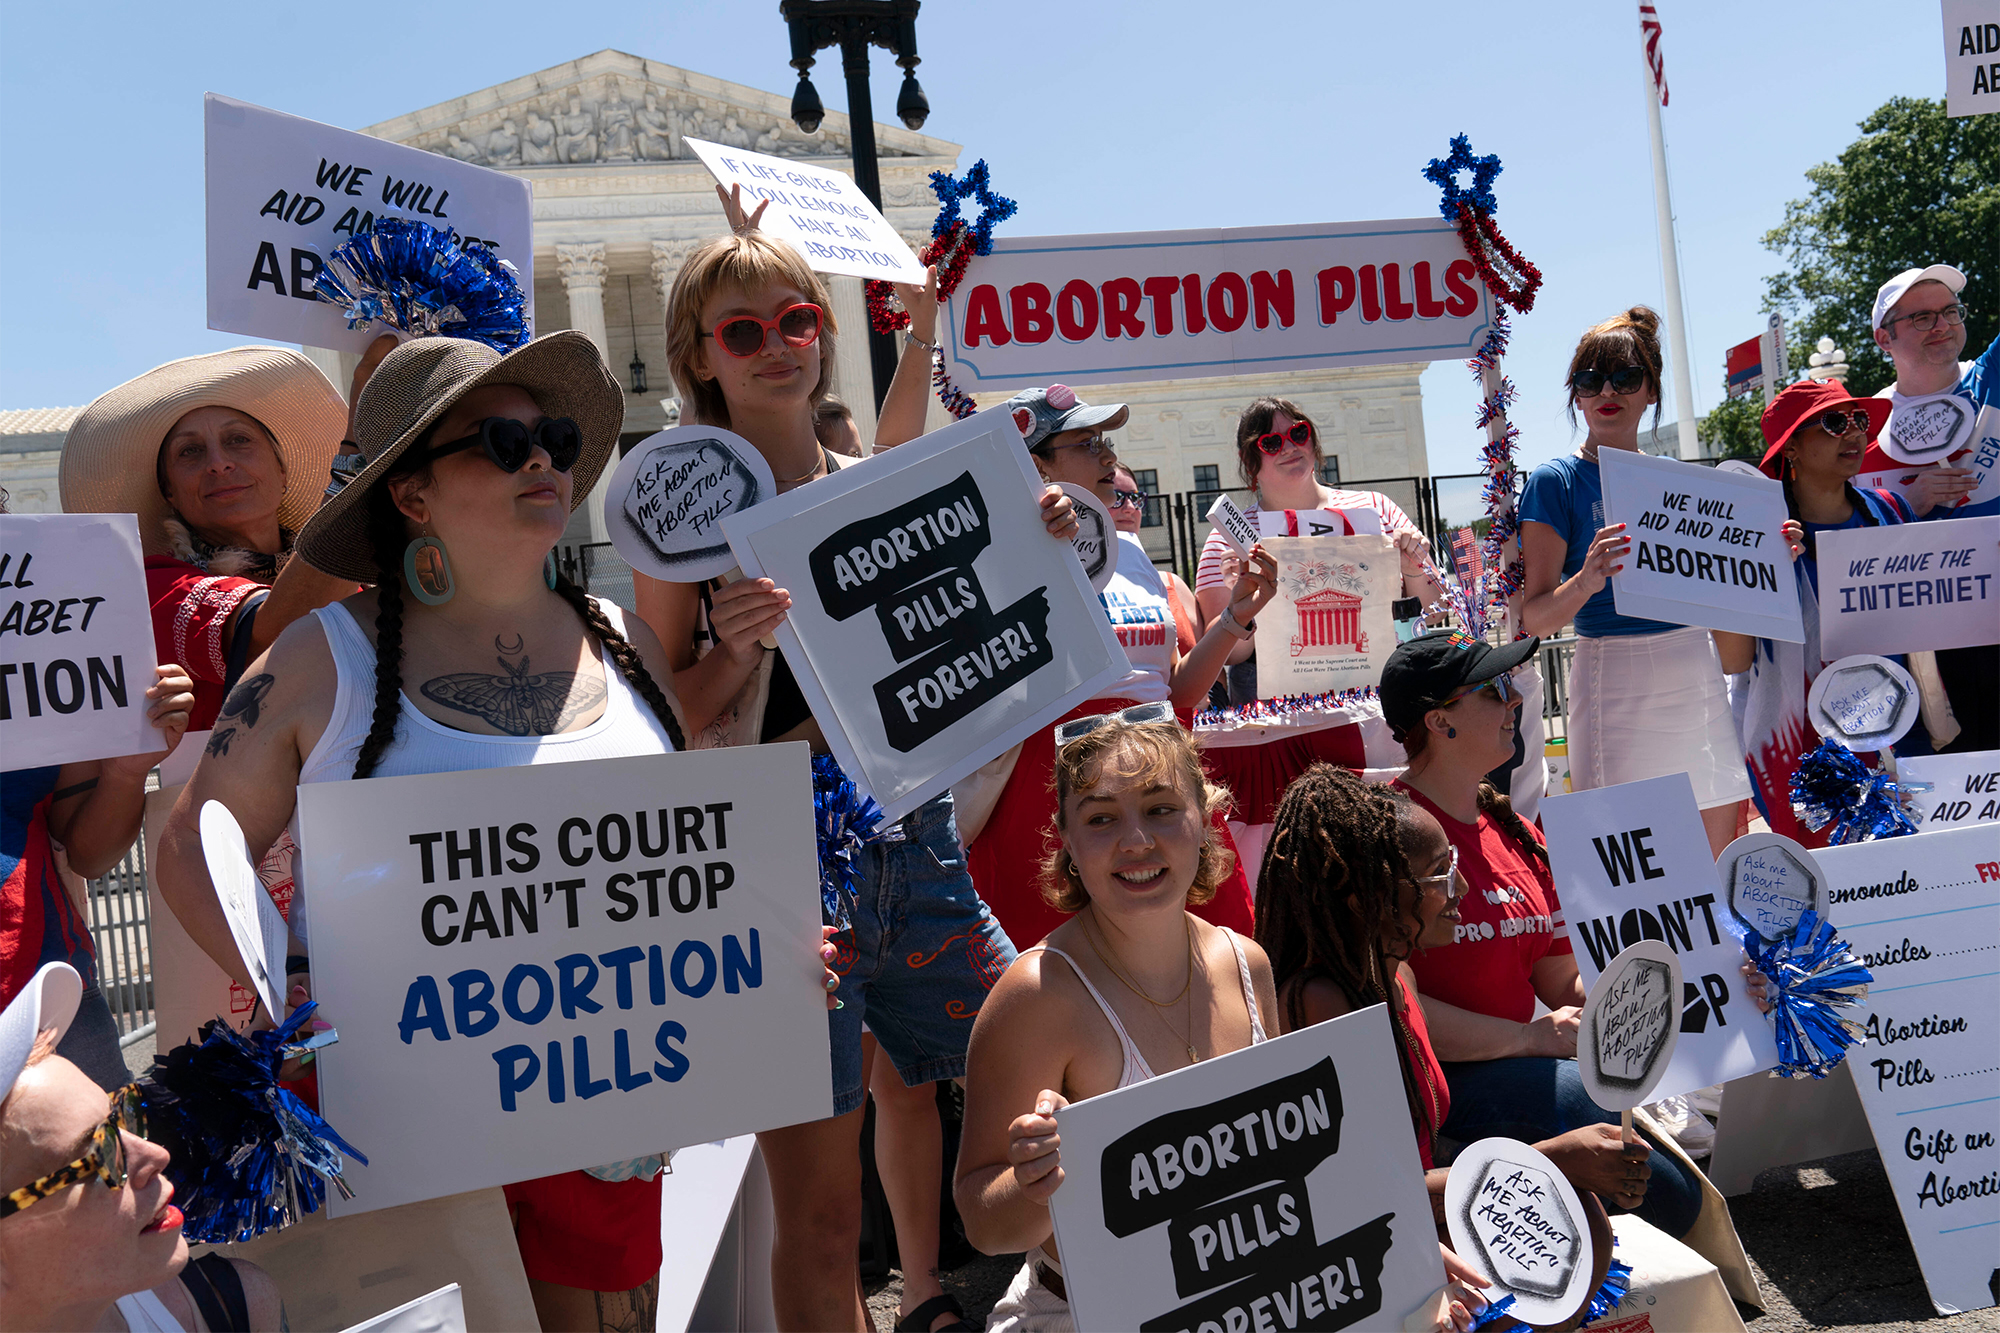 A crowd of women hold signs that say "Abortion Pills Forever"